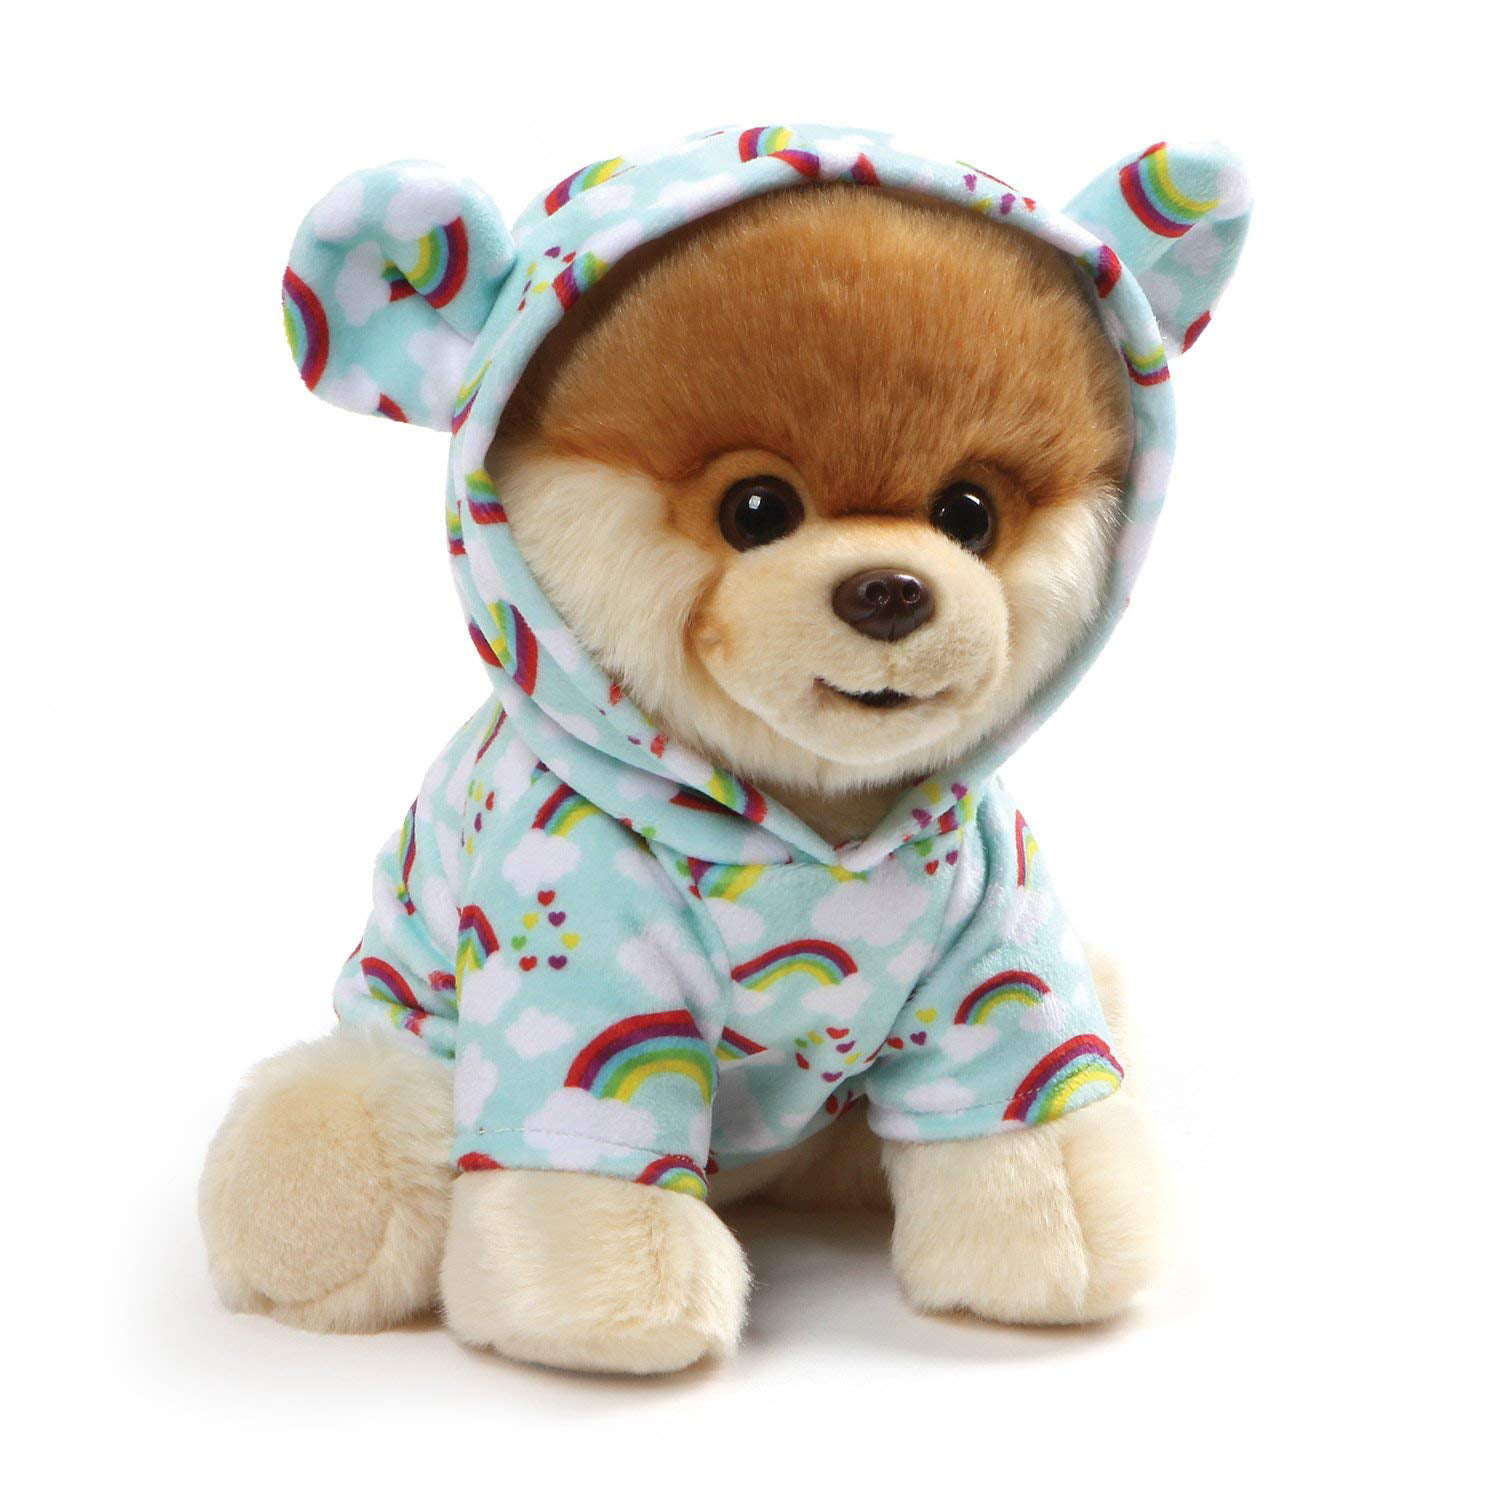 Details about   Blue 9" BOO The World's Cutest Dog Plush Panda Pajamas w/Tags Gund 